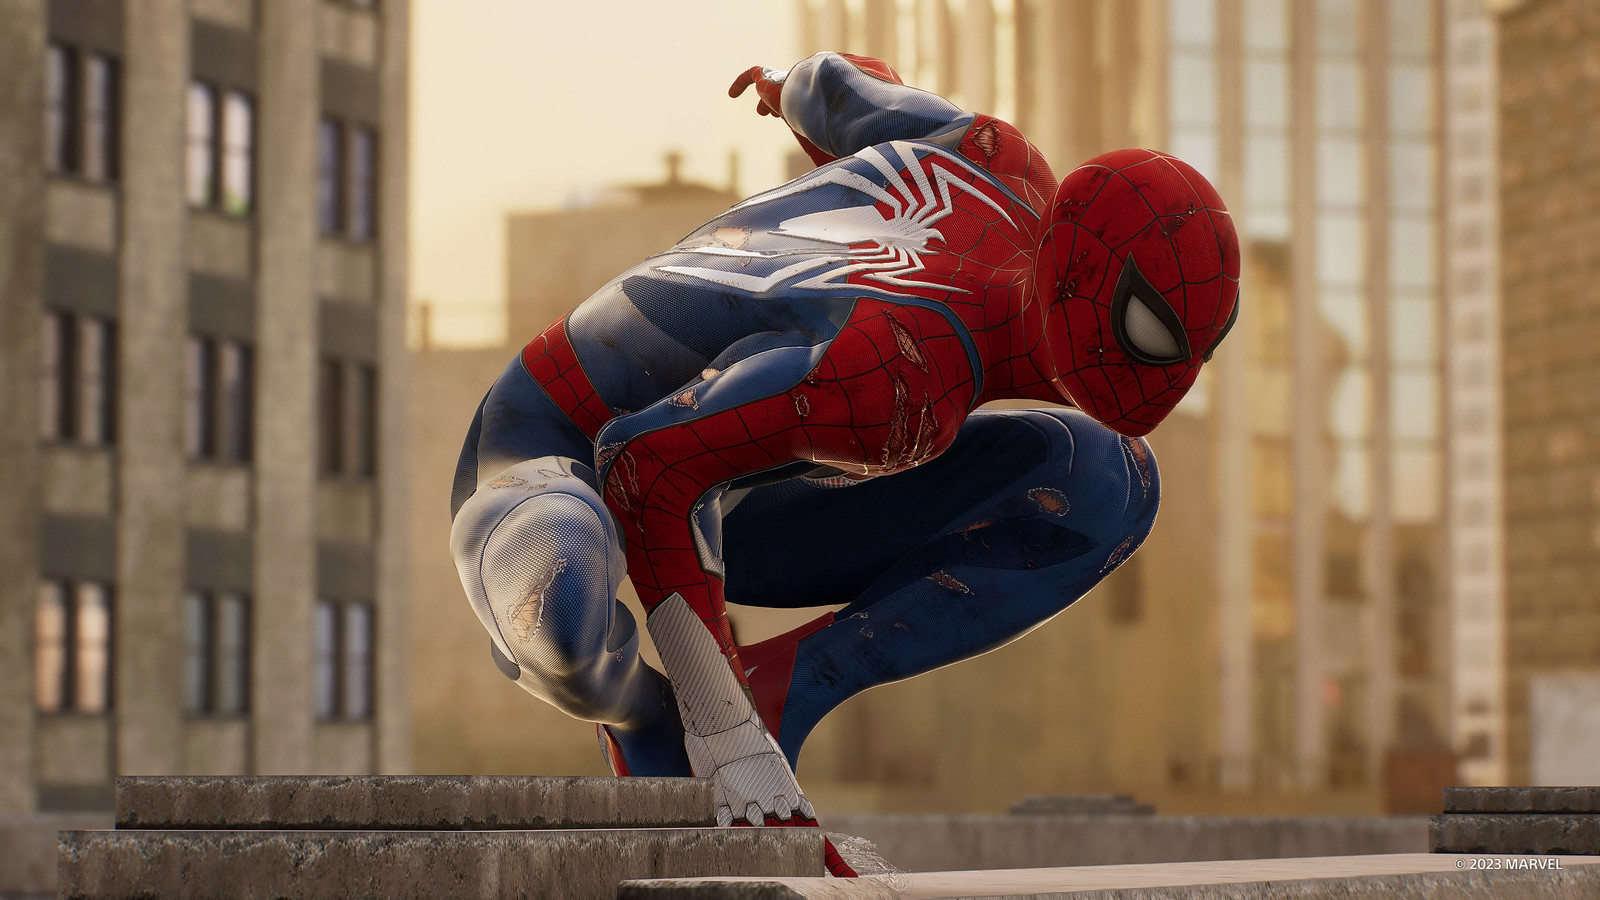 Major Spider-Man 2 update coming early 2024: New Game+, mission replay,  day/night, more